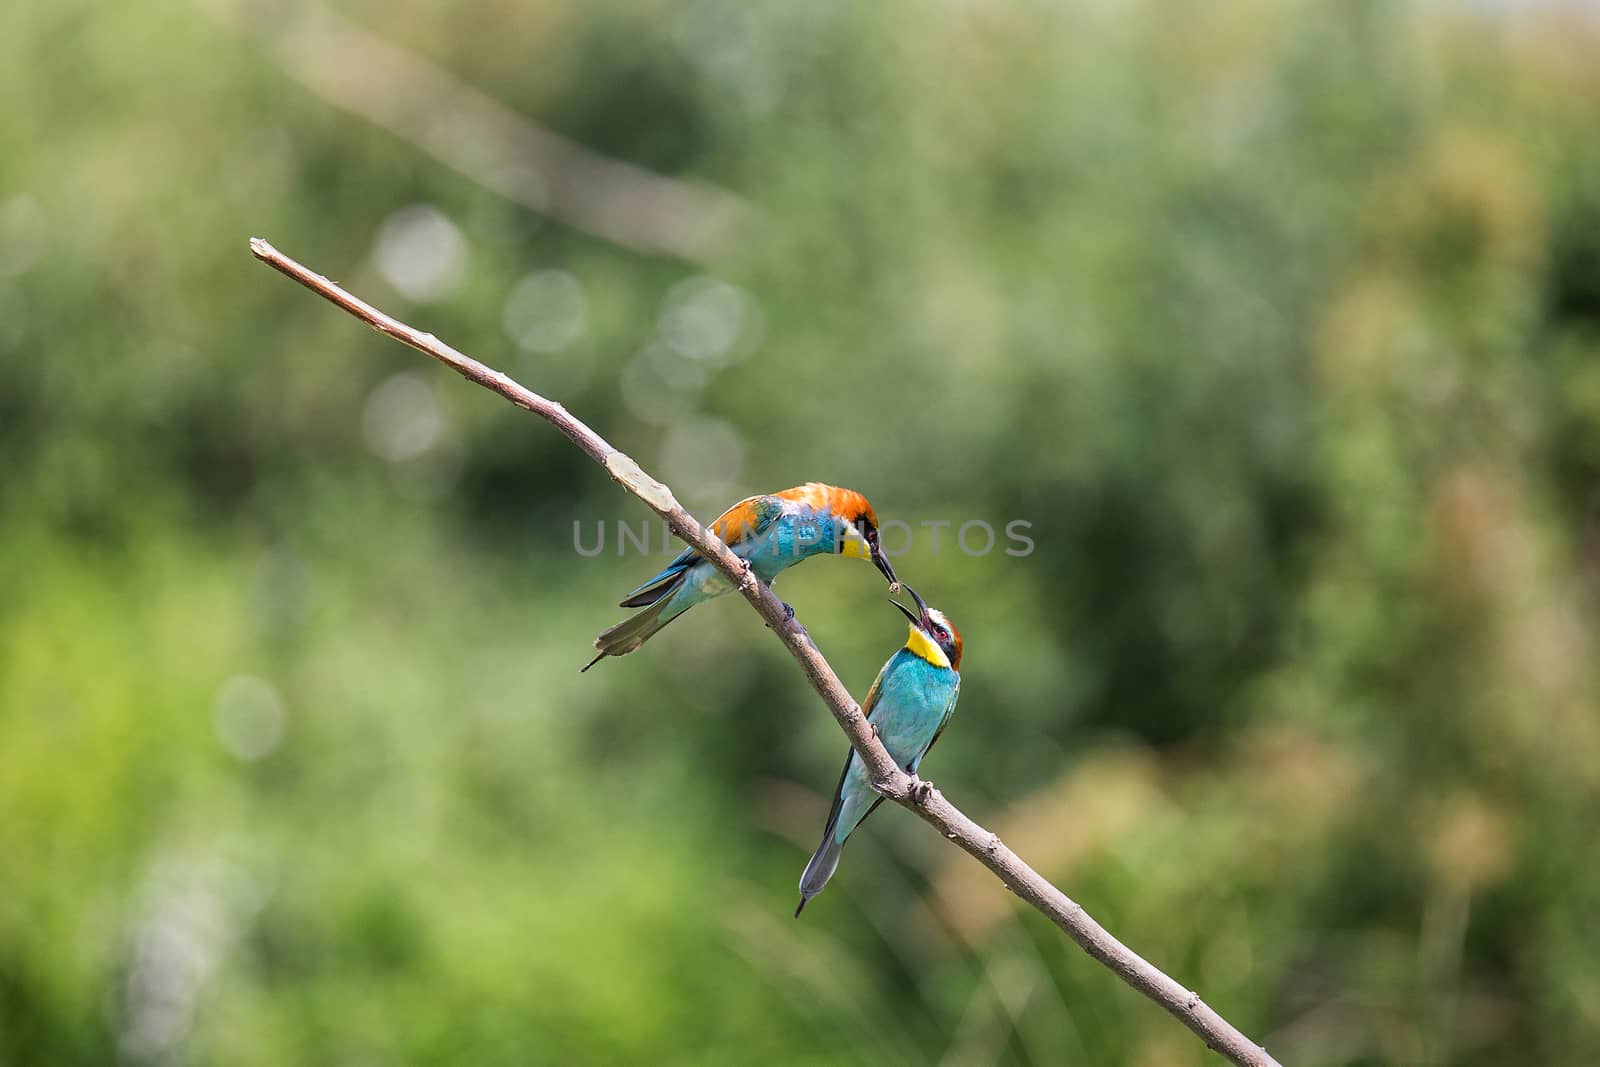 European Bee-eater courtship (Merops apiaster) - male with insect for female, Isola della Cona, Monfalcone, Italy, Europe